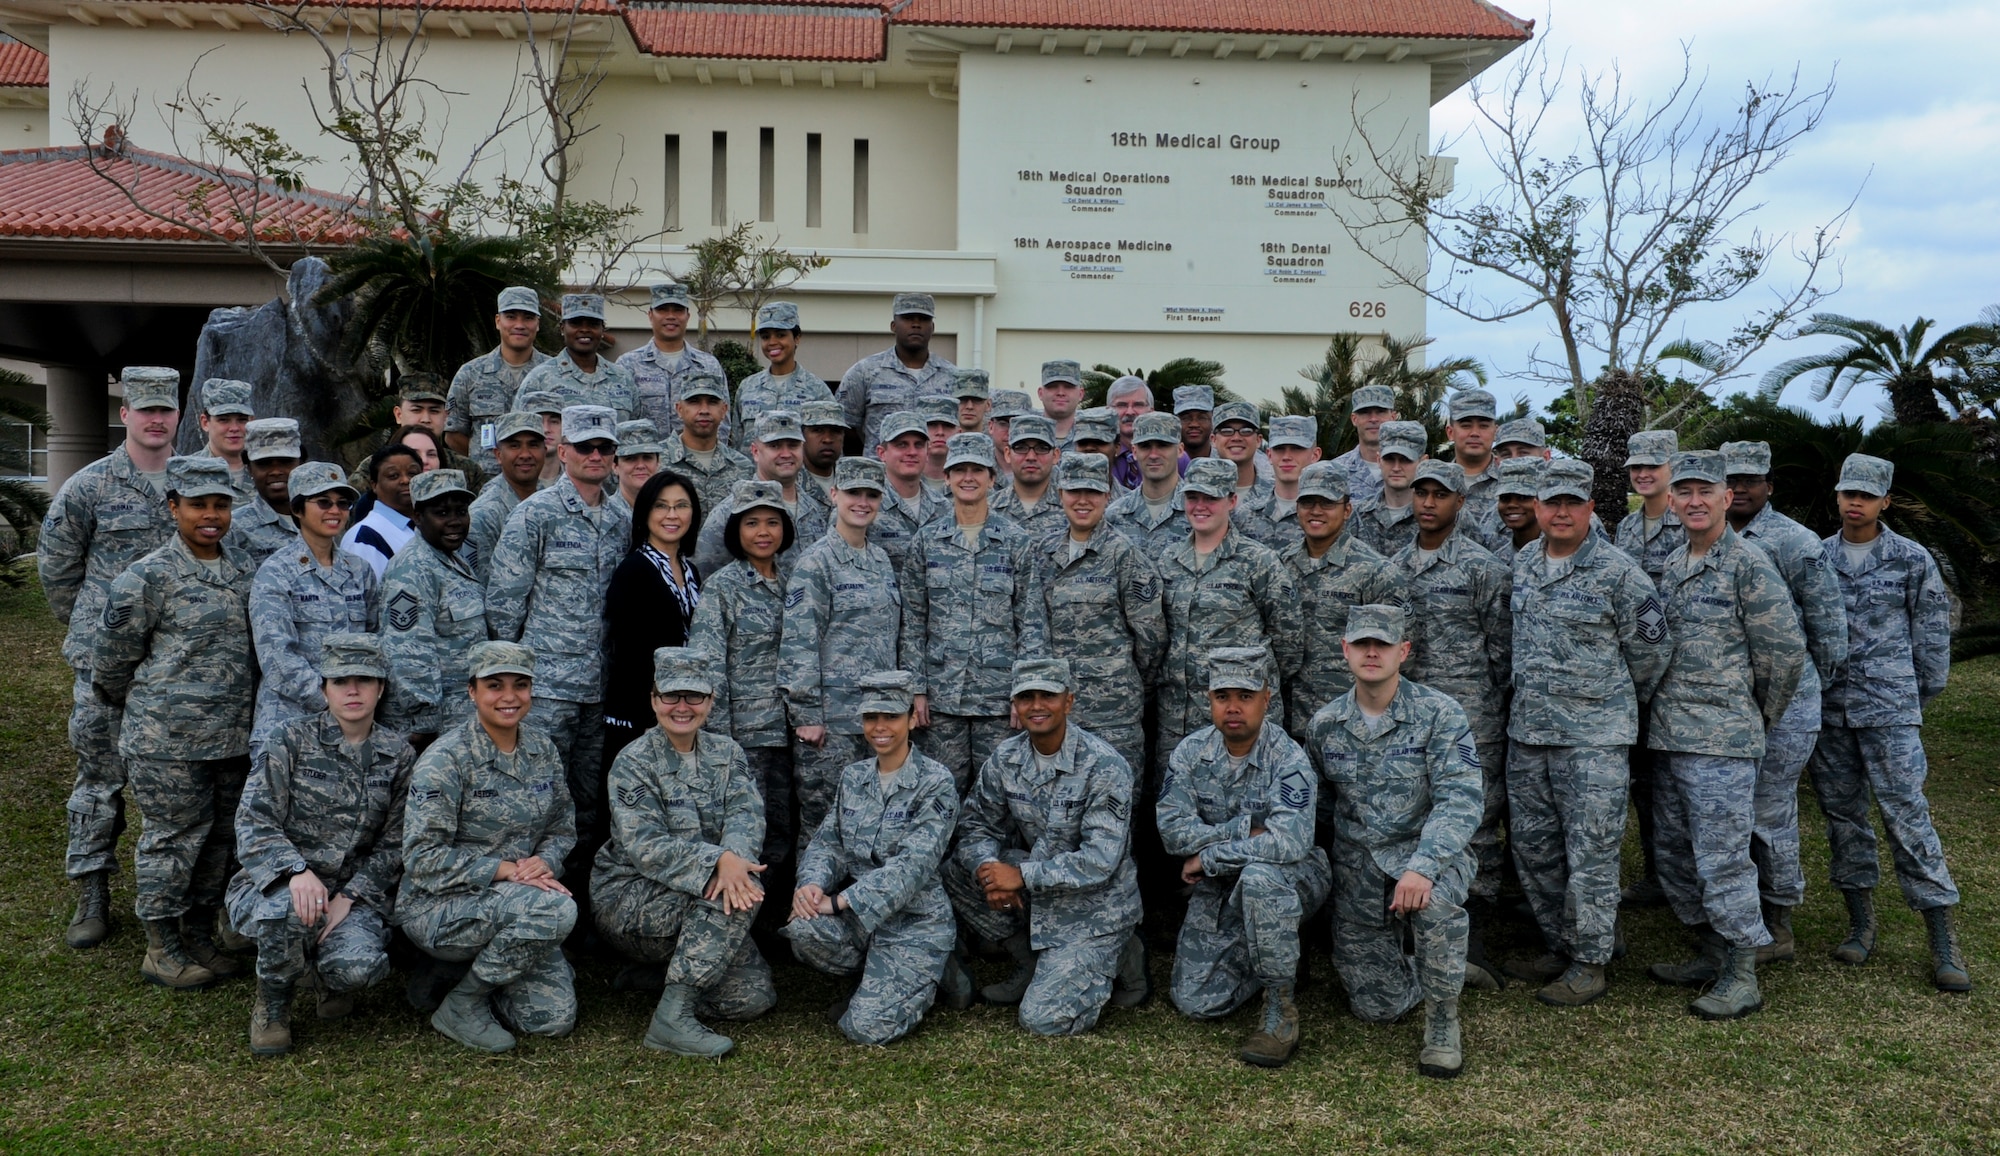 18th Medical Group personnel get together for a group photo at the 18th Medical Group building on Kadena Air Base, Japan, Jan. 24, 2013. The 18th MDG is the Air Force's largest freestanding ambulatory clinic in terms of personnel and it holds more than 80 medical and dental care providers. (U.S. Air Force photo/Airman 1st Class Justin Veazie)